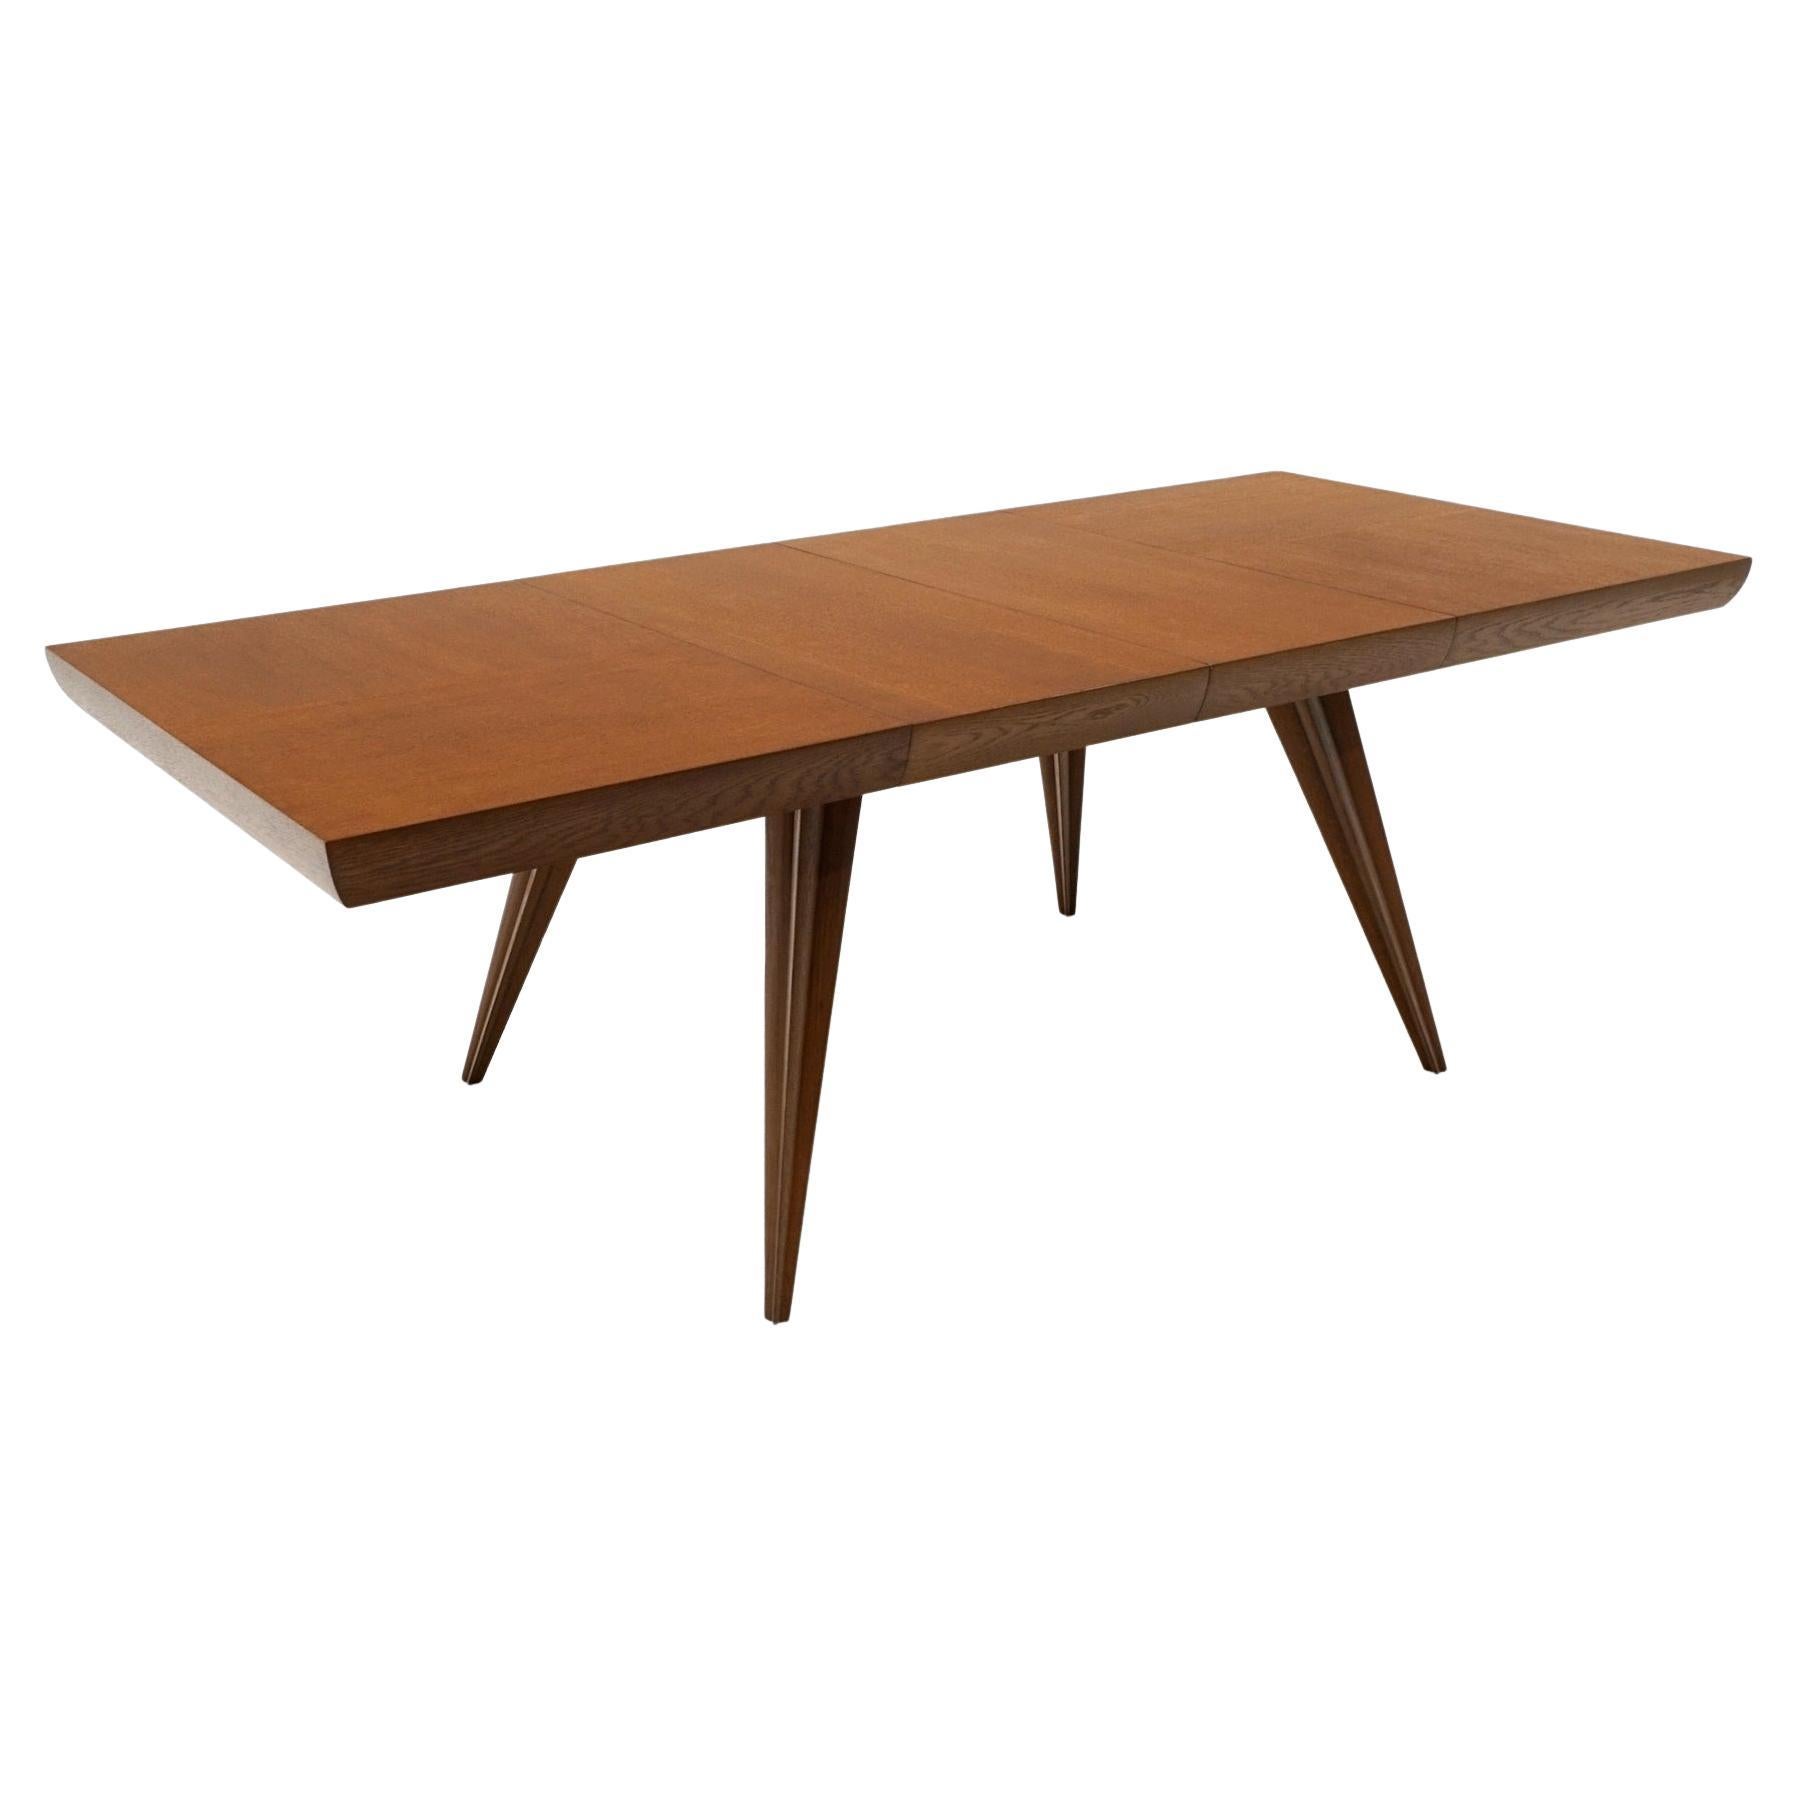 Vladimir Kagan Expandable Dining Table with Leaves. Oak.  Custom Made. For Sale